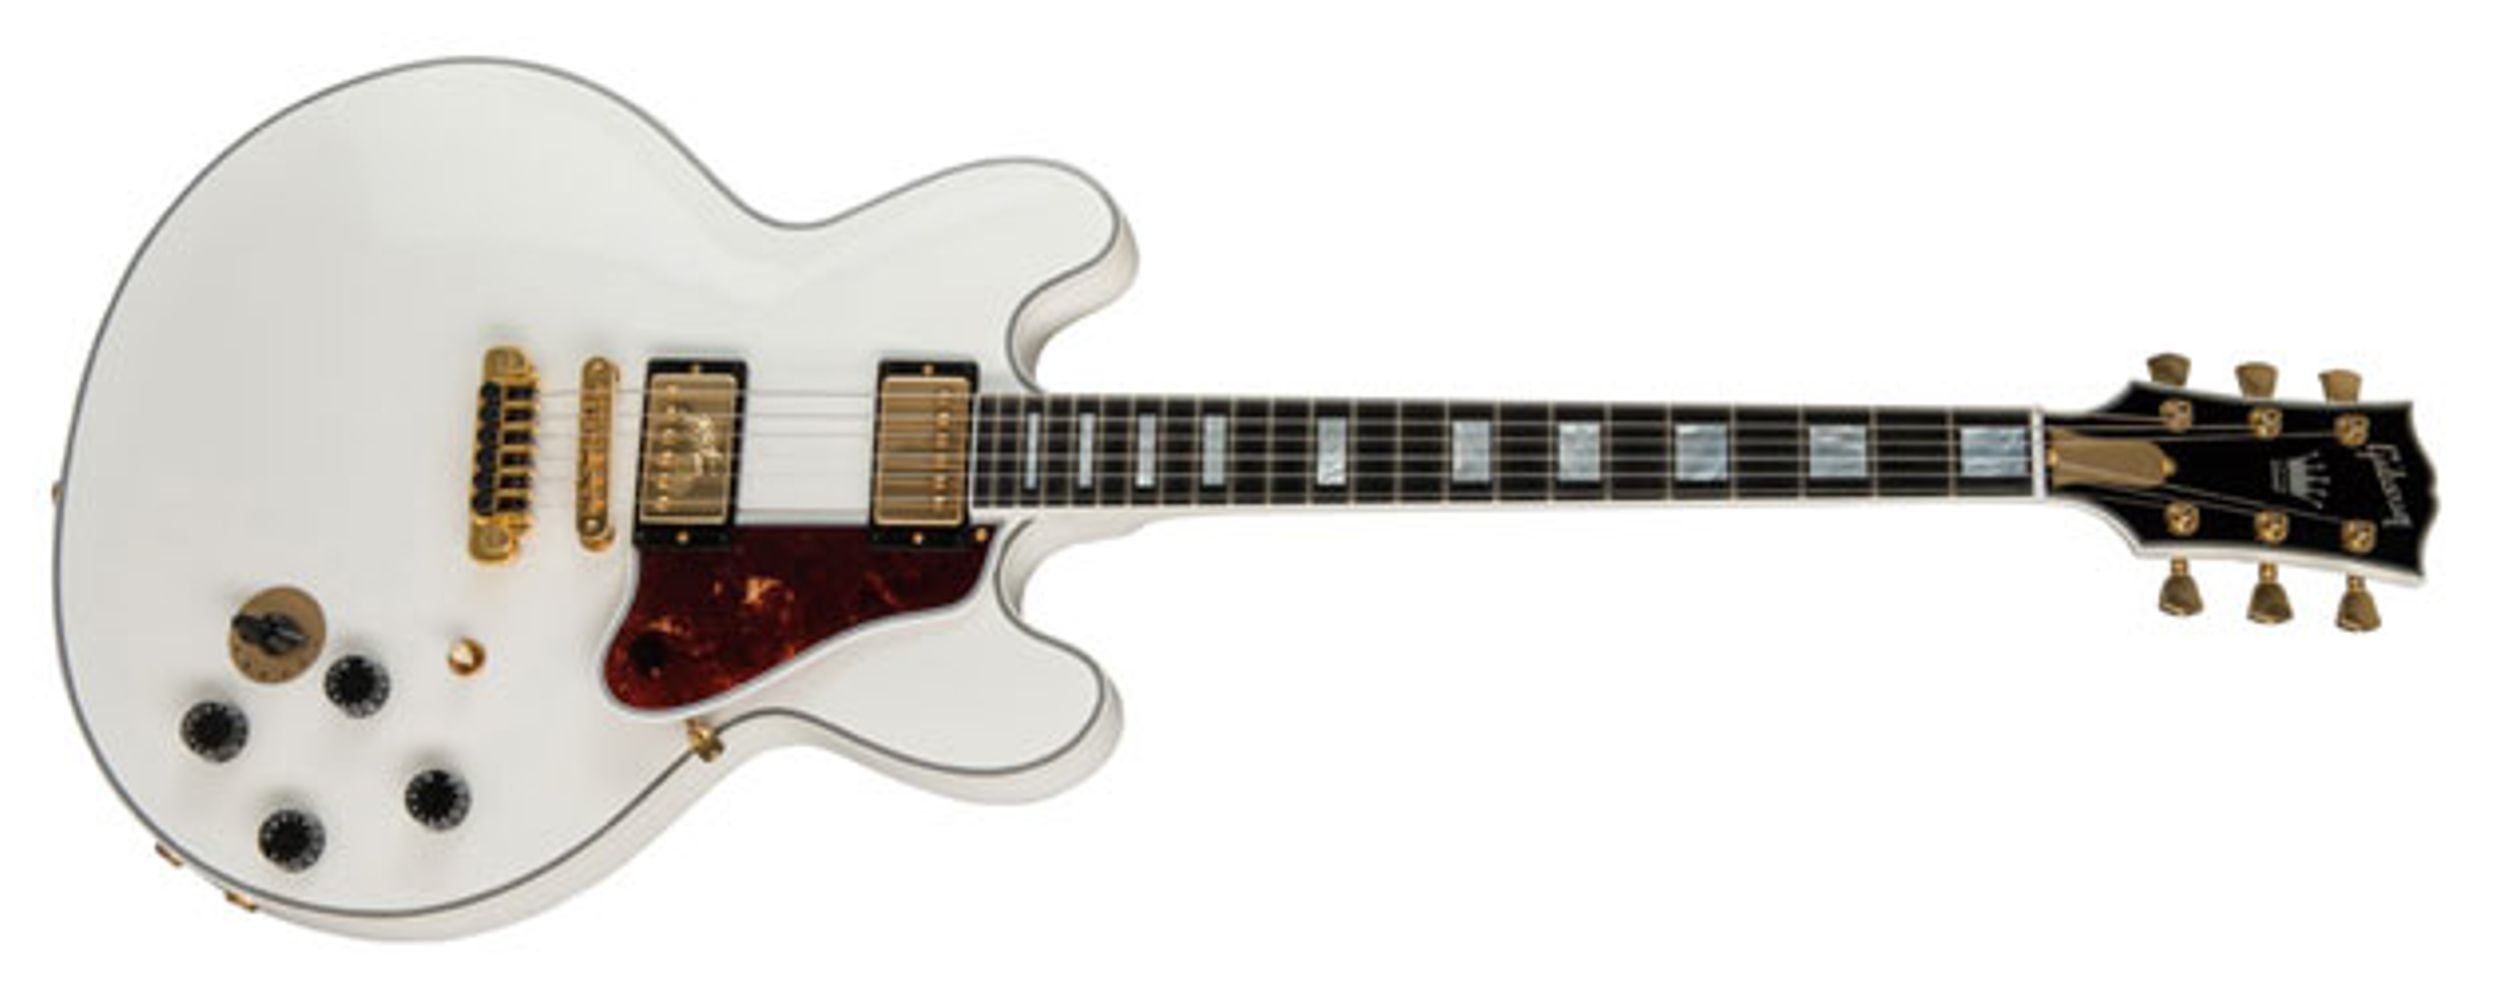 Gibson Names B.B. King a "Gibson Legacy Artist" and Releases Alpine White Limited-Edition “Lucille” ES